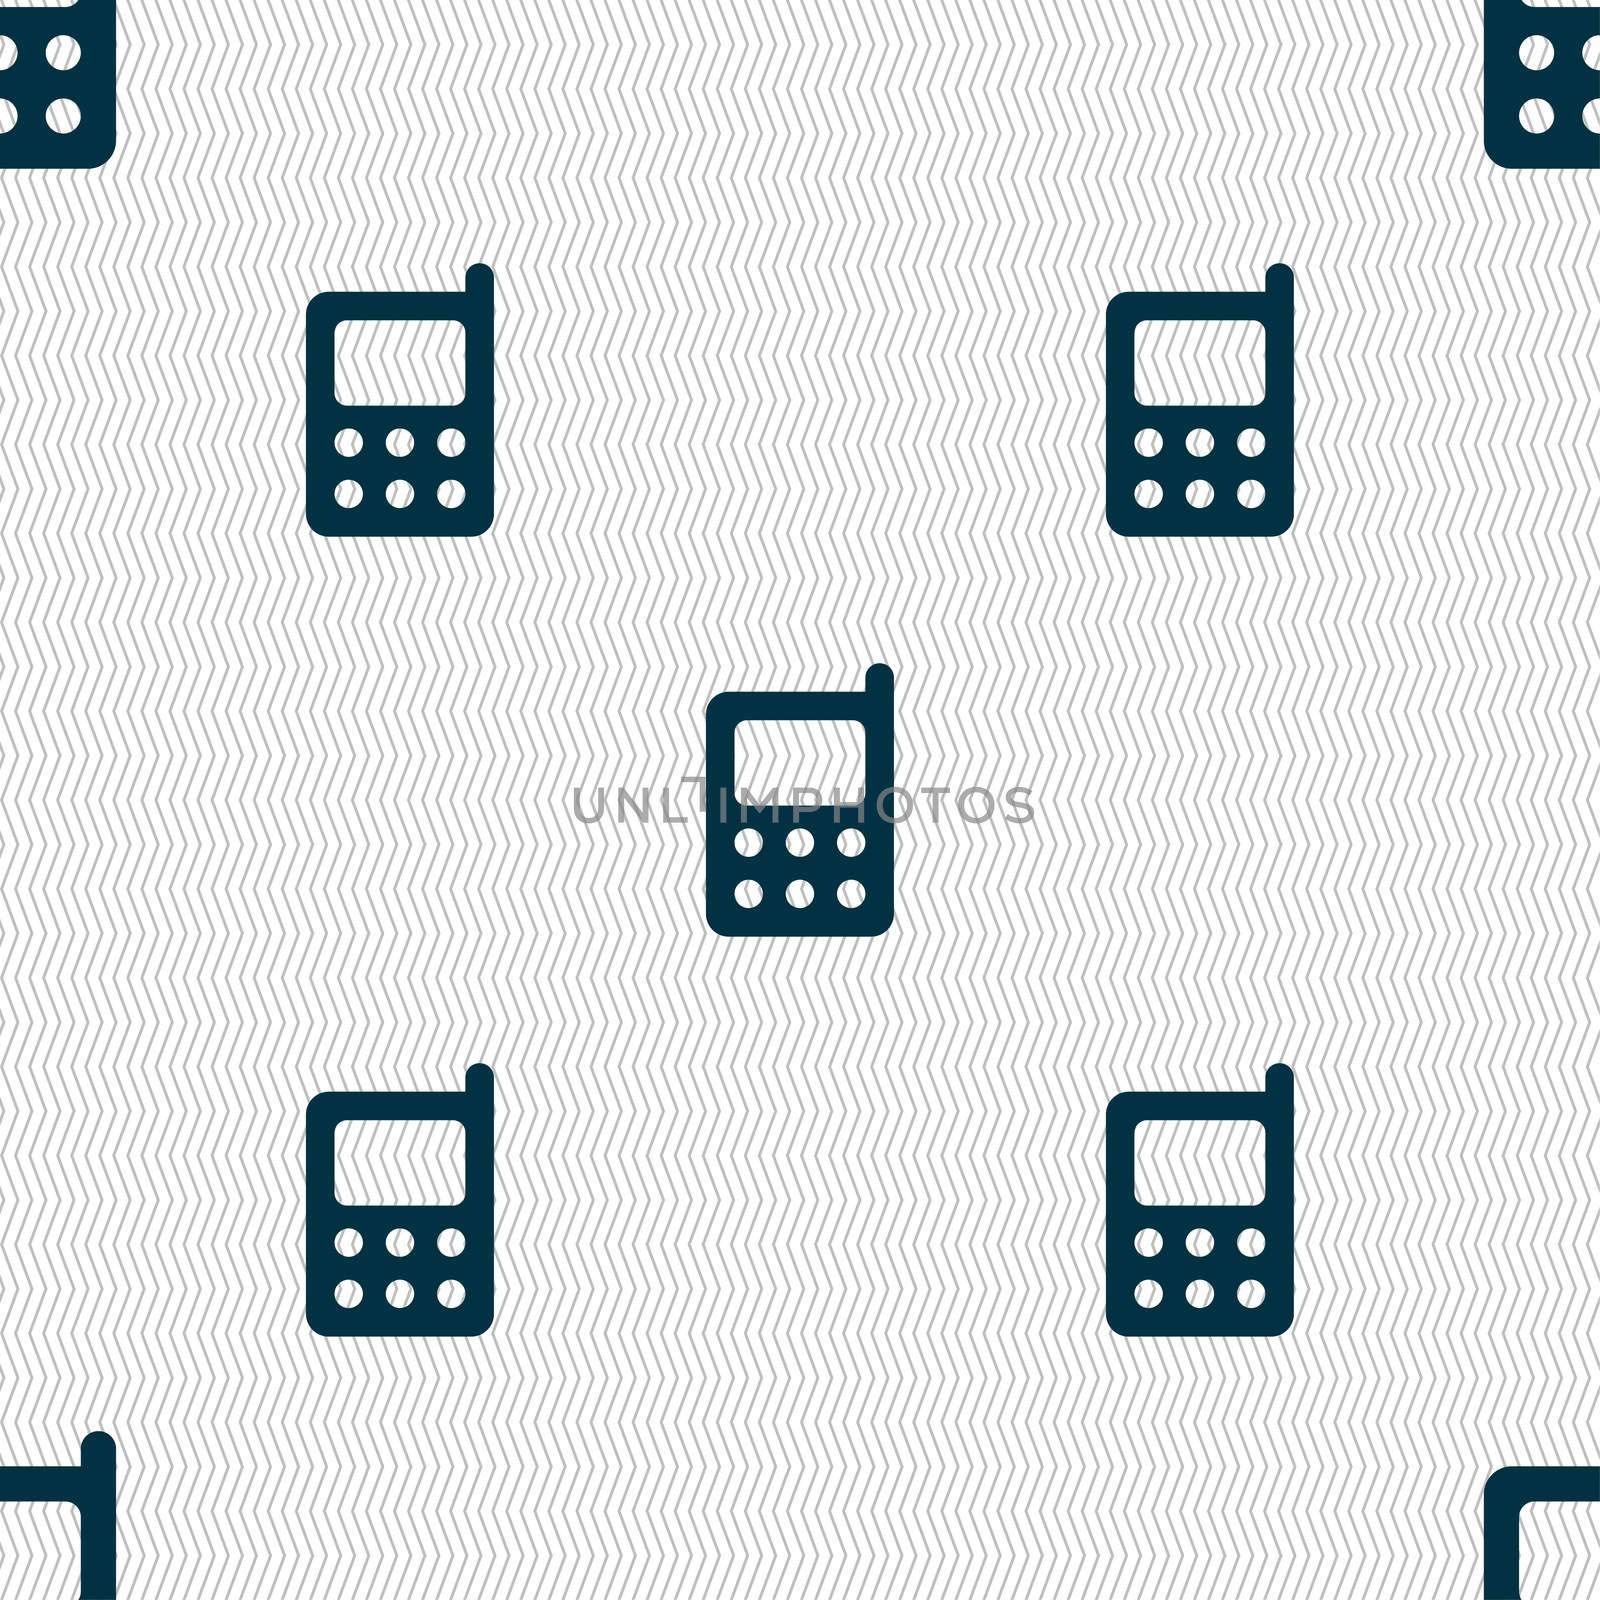 mobile phone icon sign. Seamless pattern with geometric texture. illustration